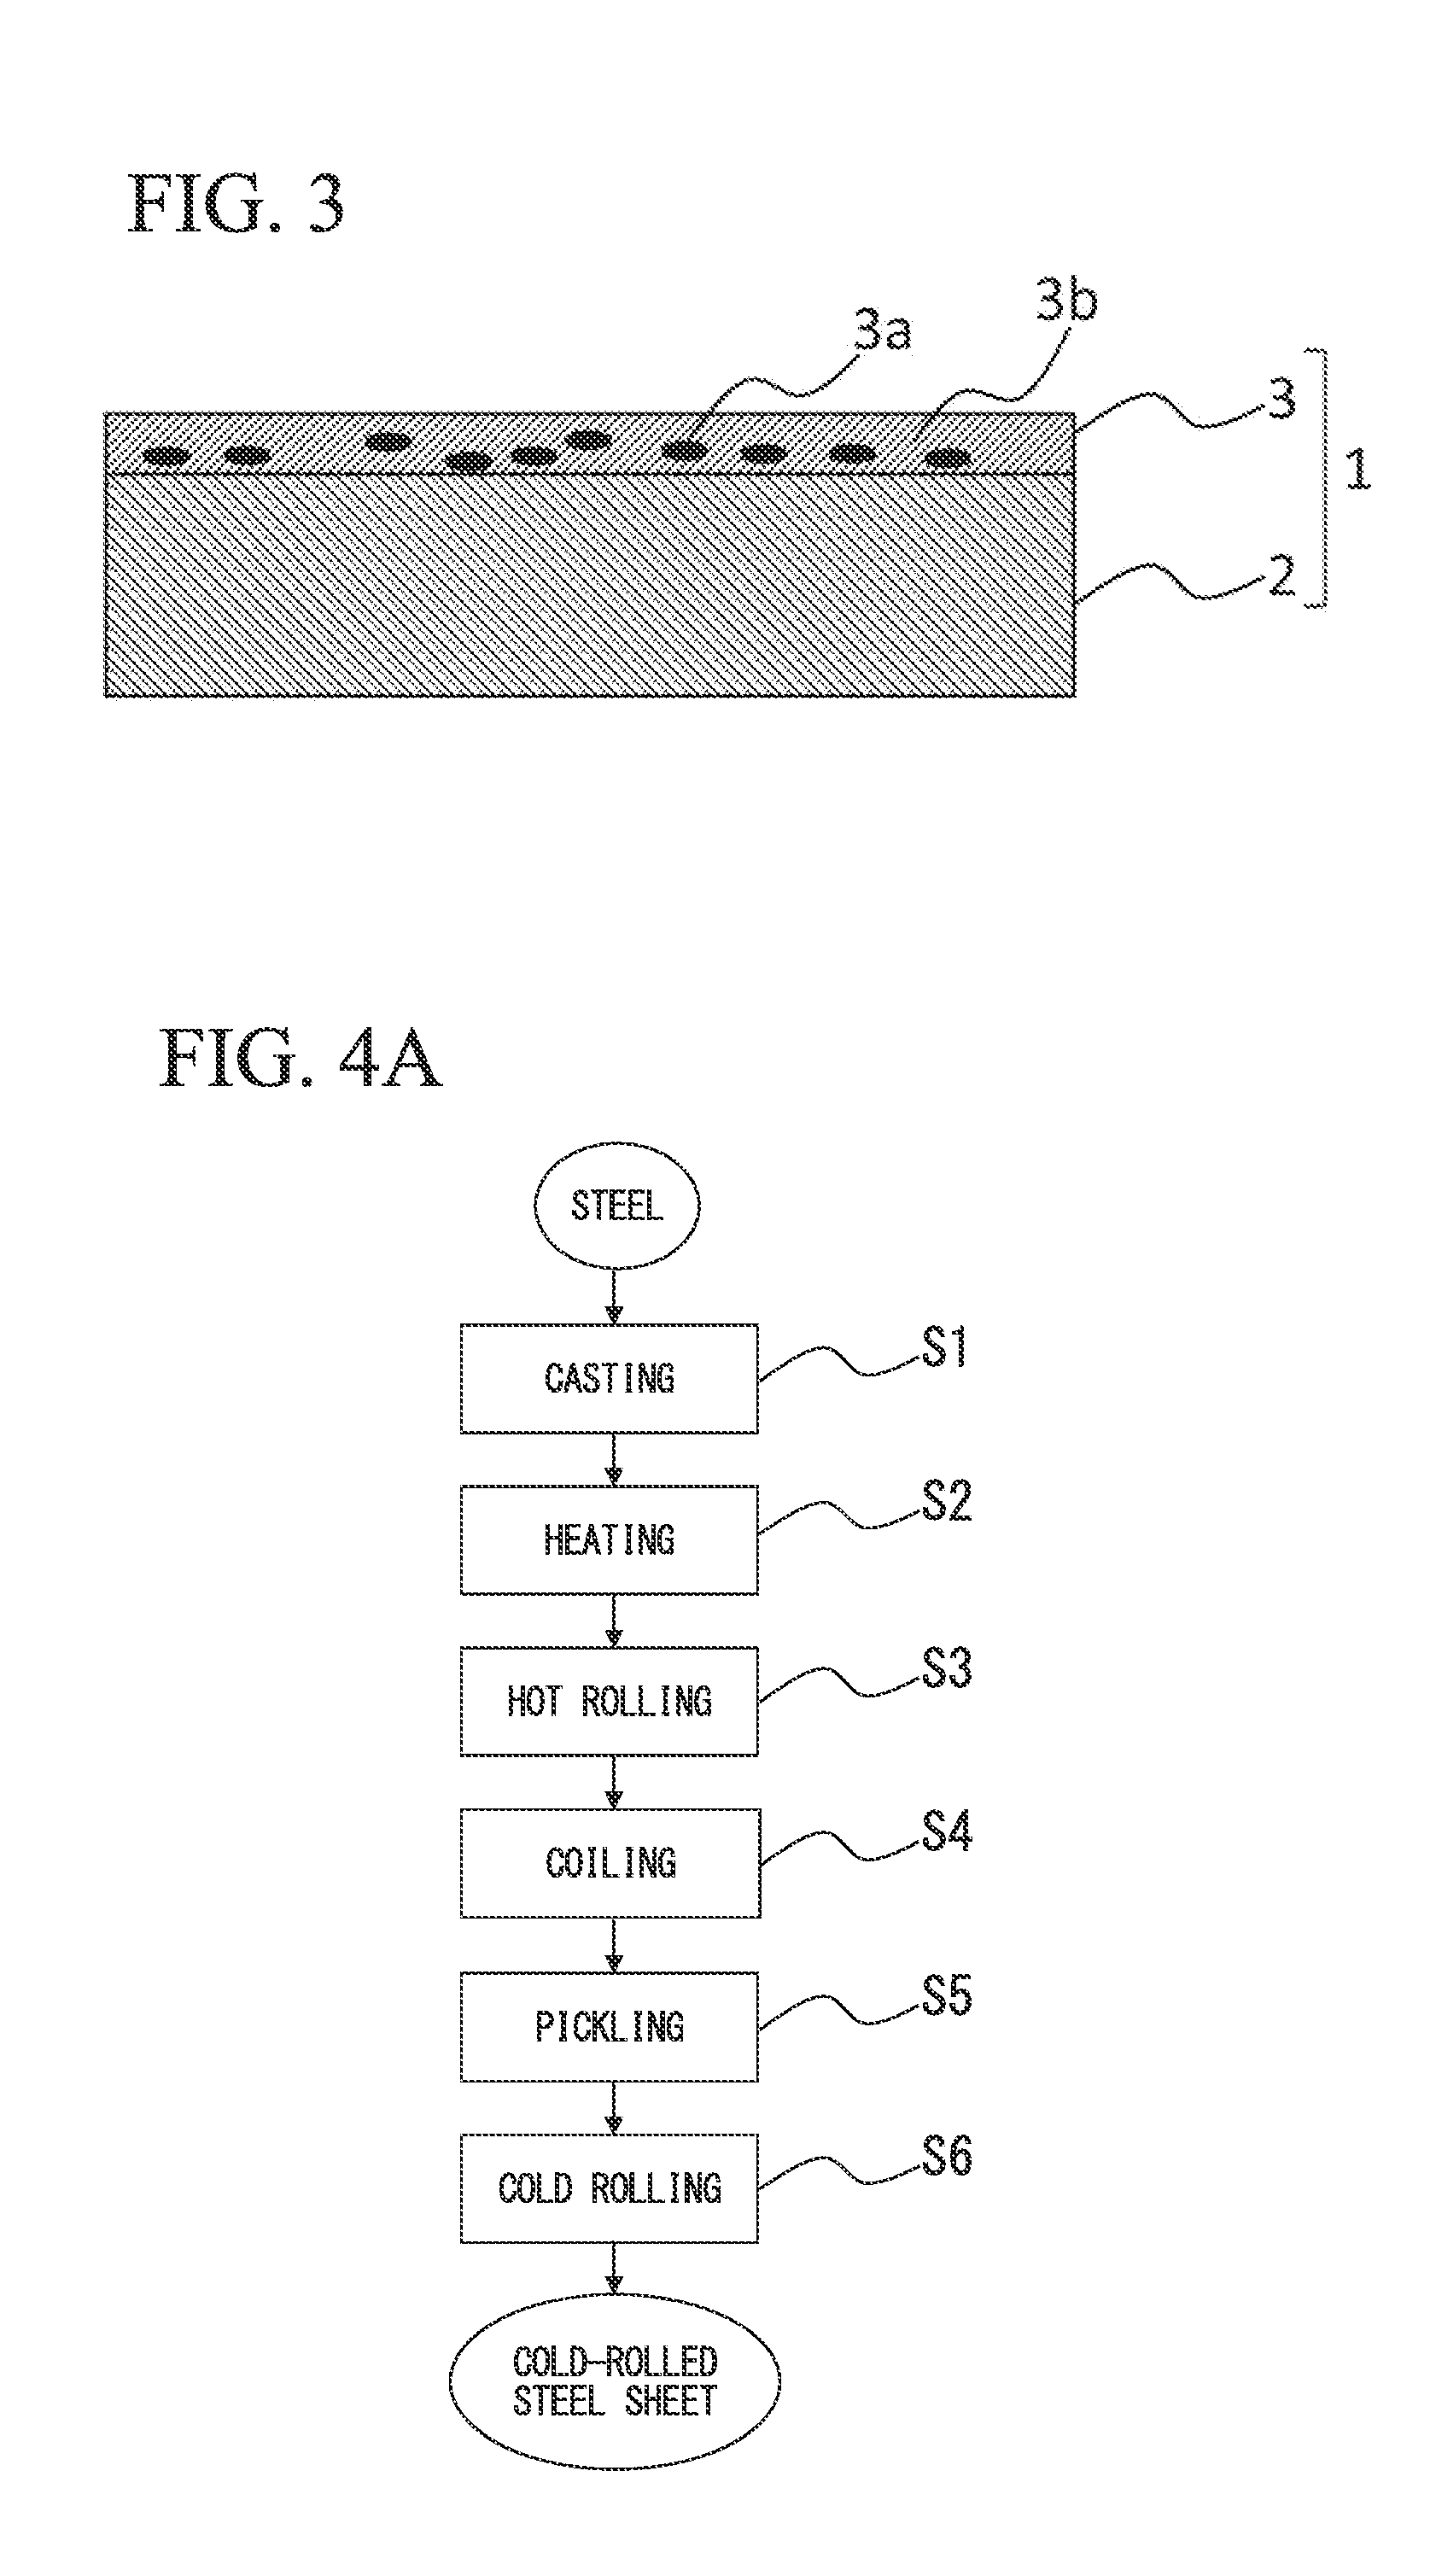 Galvanized steel sheet and method of manufacturing the same